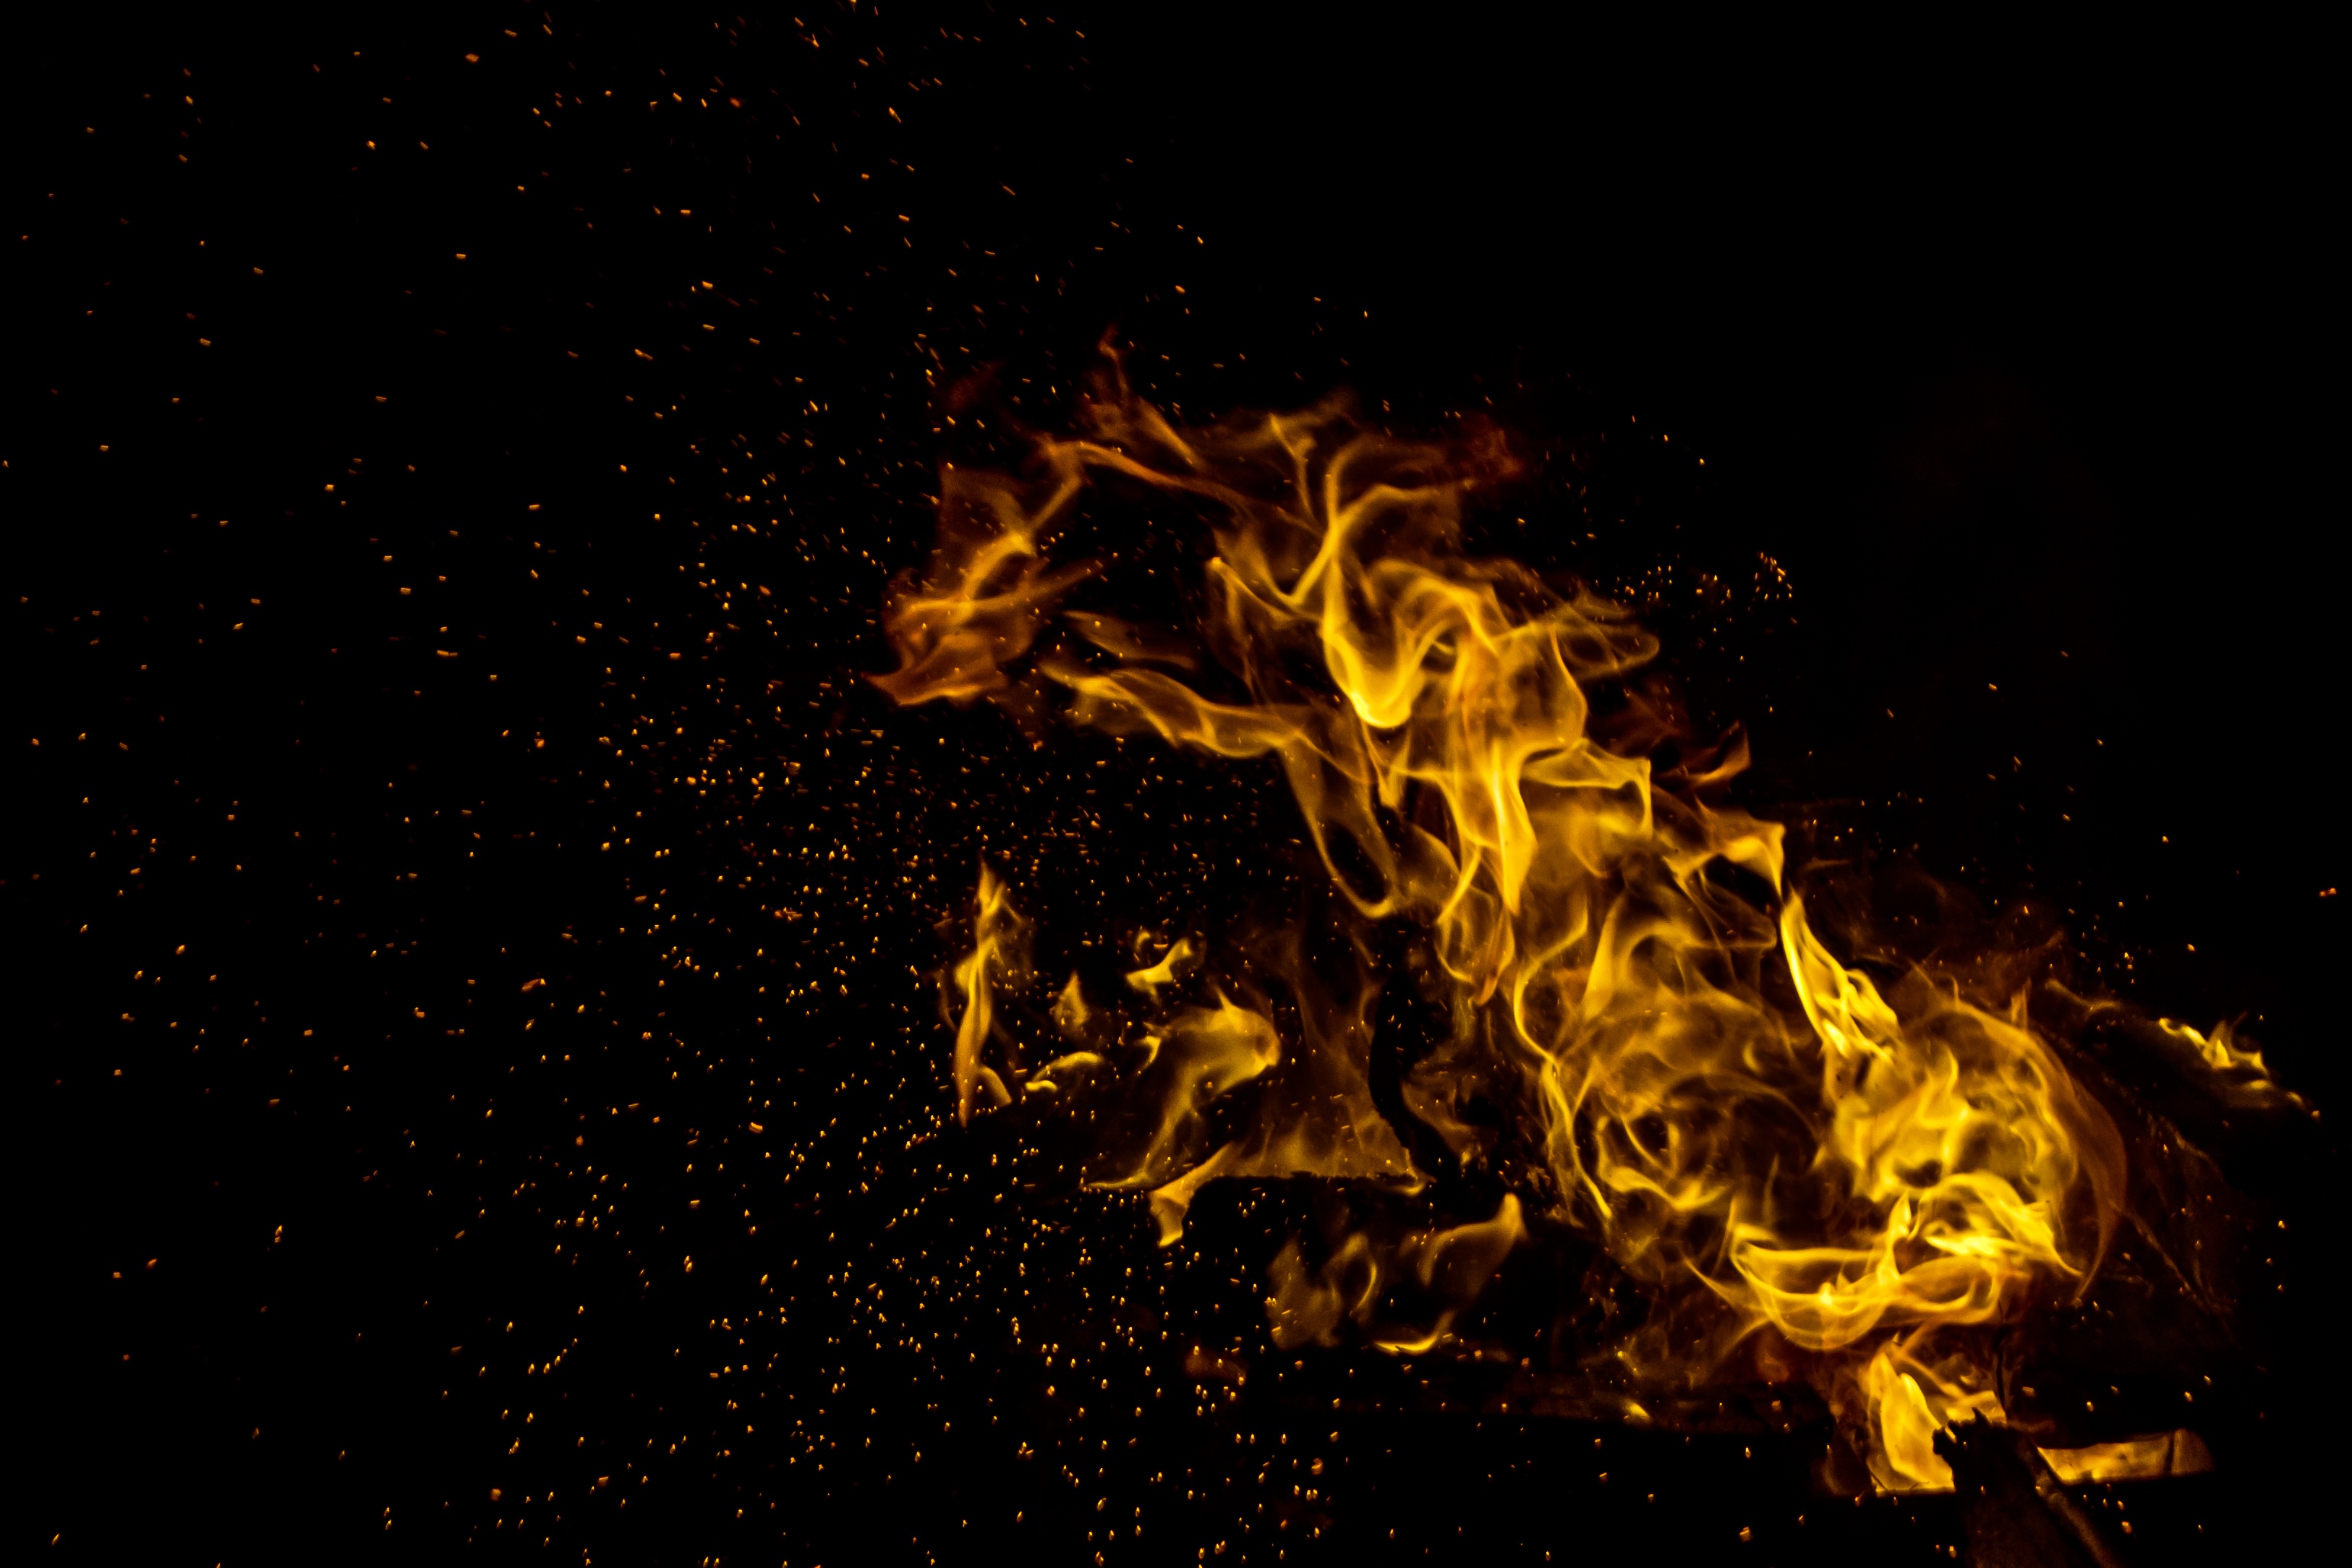 A picture of flames in the dark.